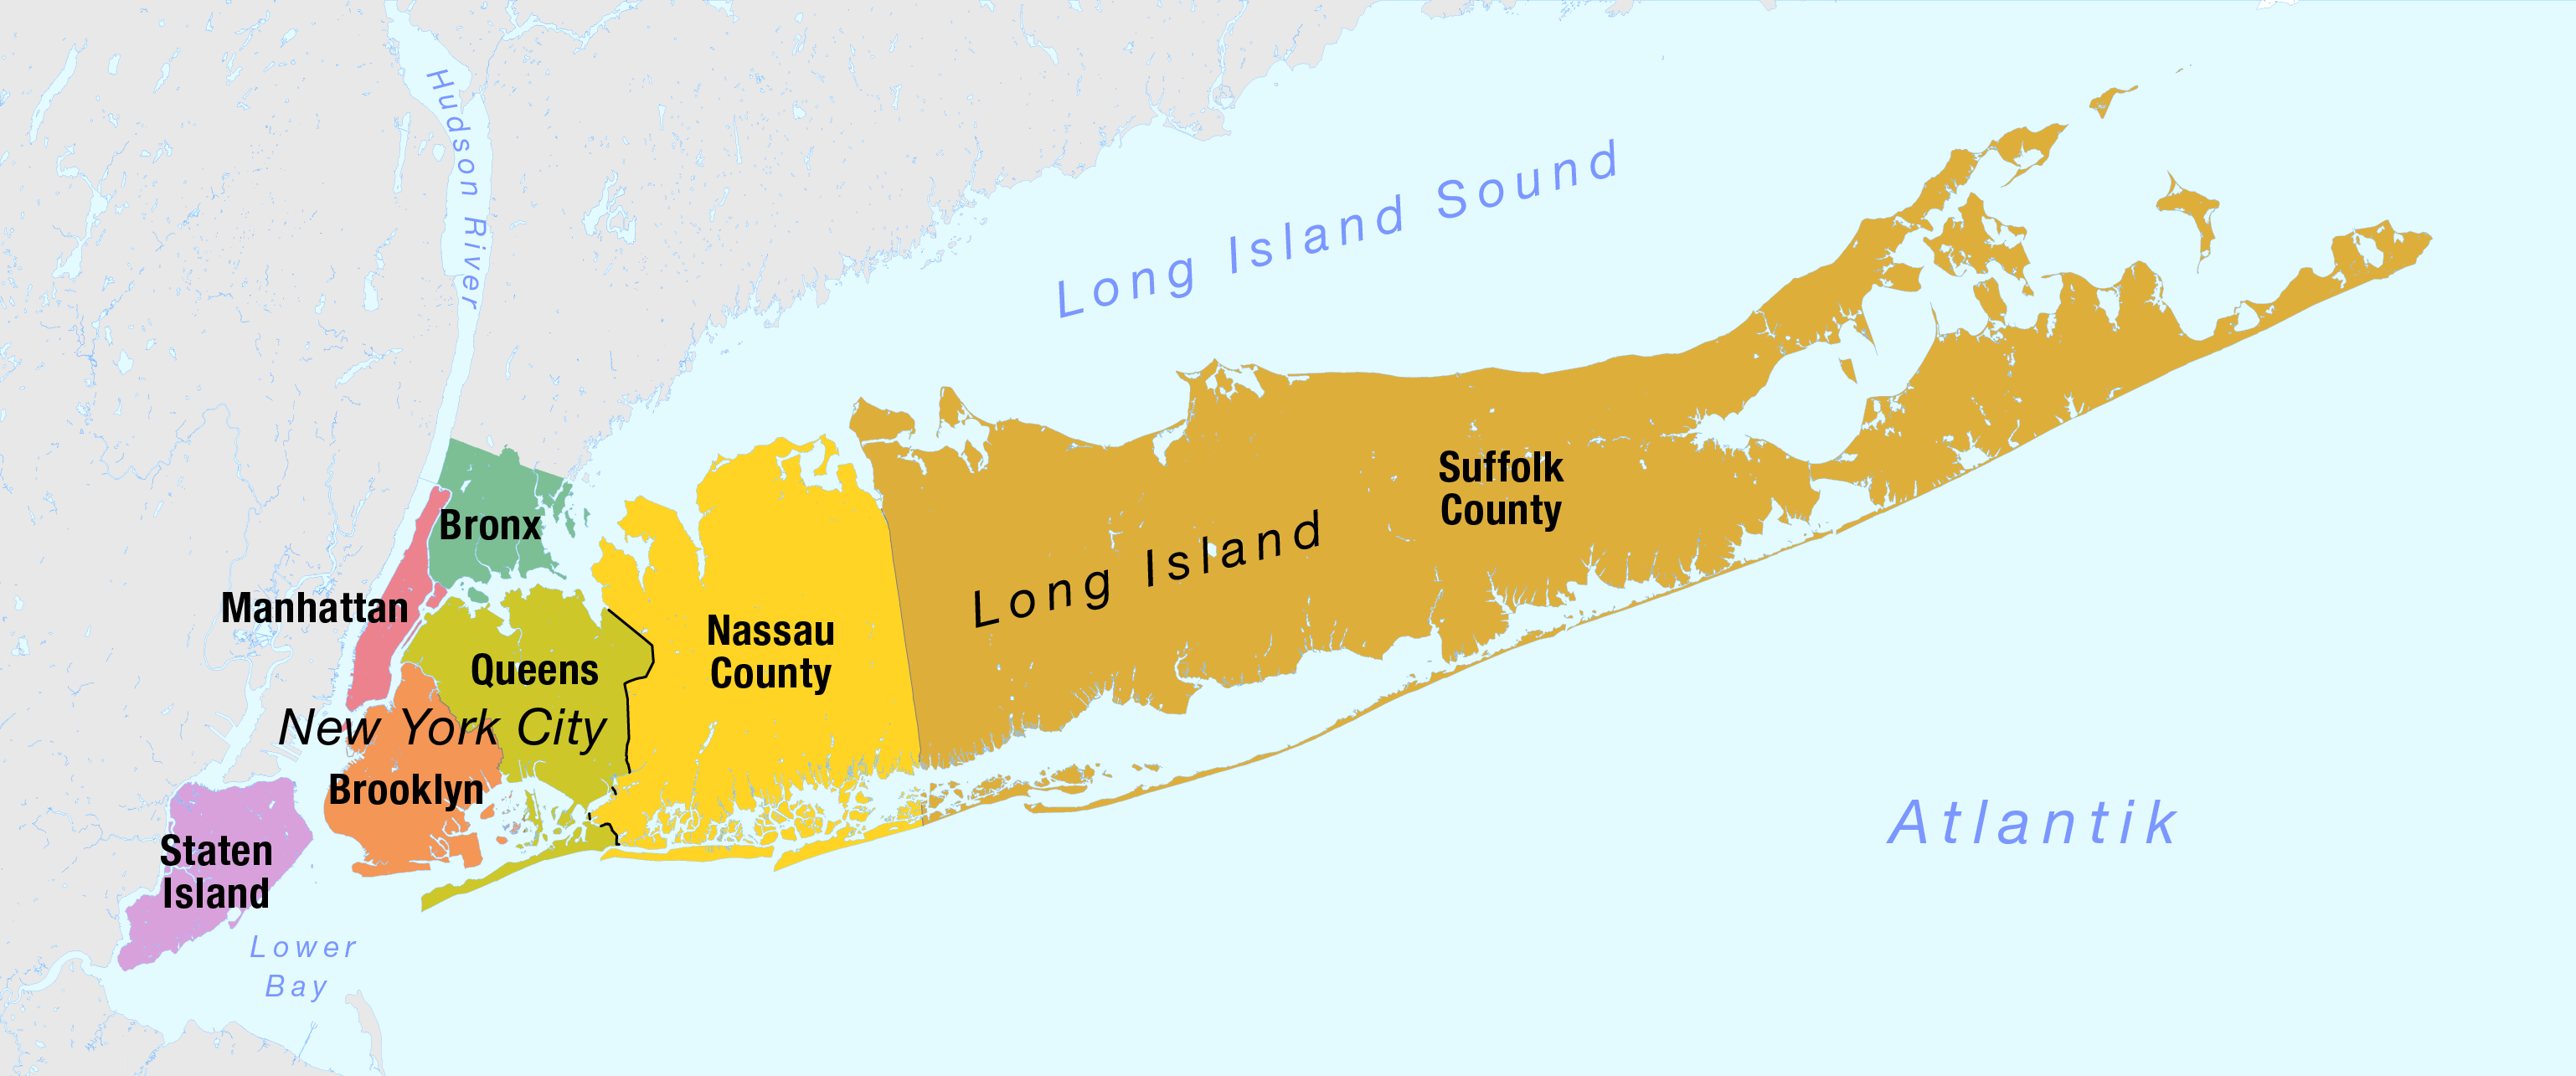 Map_of_the_Boroughs_of_New_York_City_and_the_counties_of_Long_Island